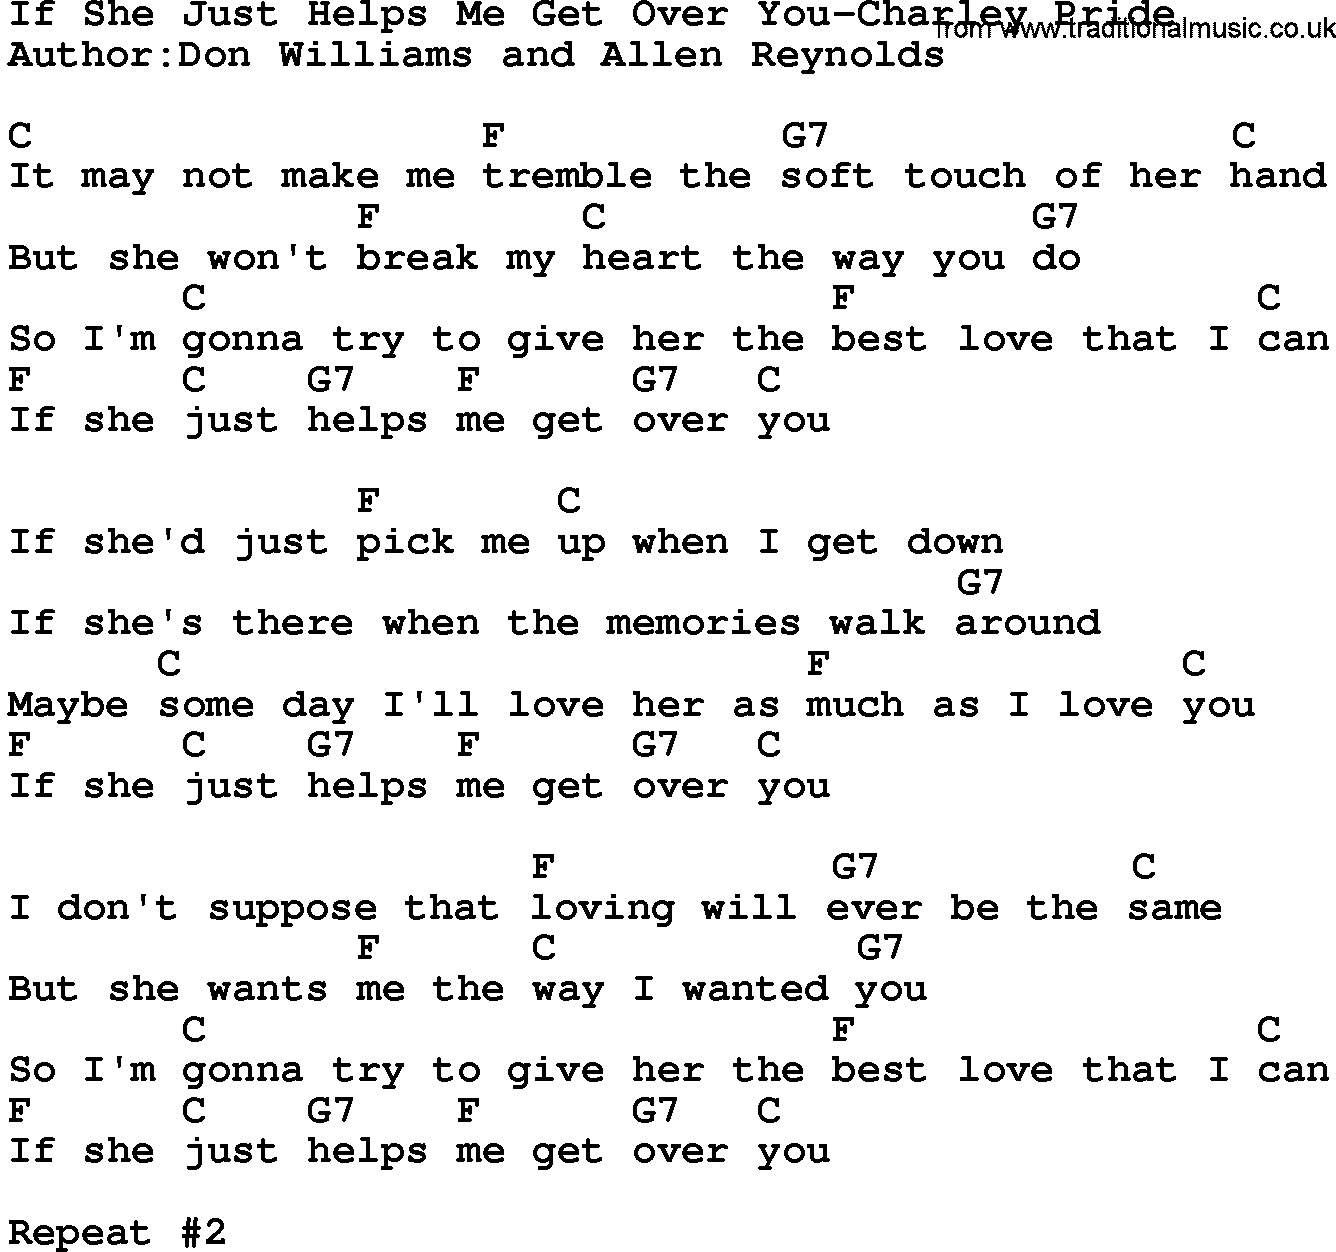 Country music song: If She Just Helps Me Get Over You-Charley Pride lyrics and chords